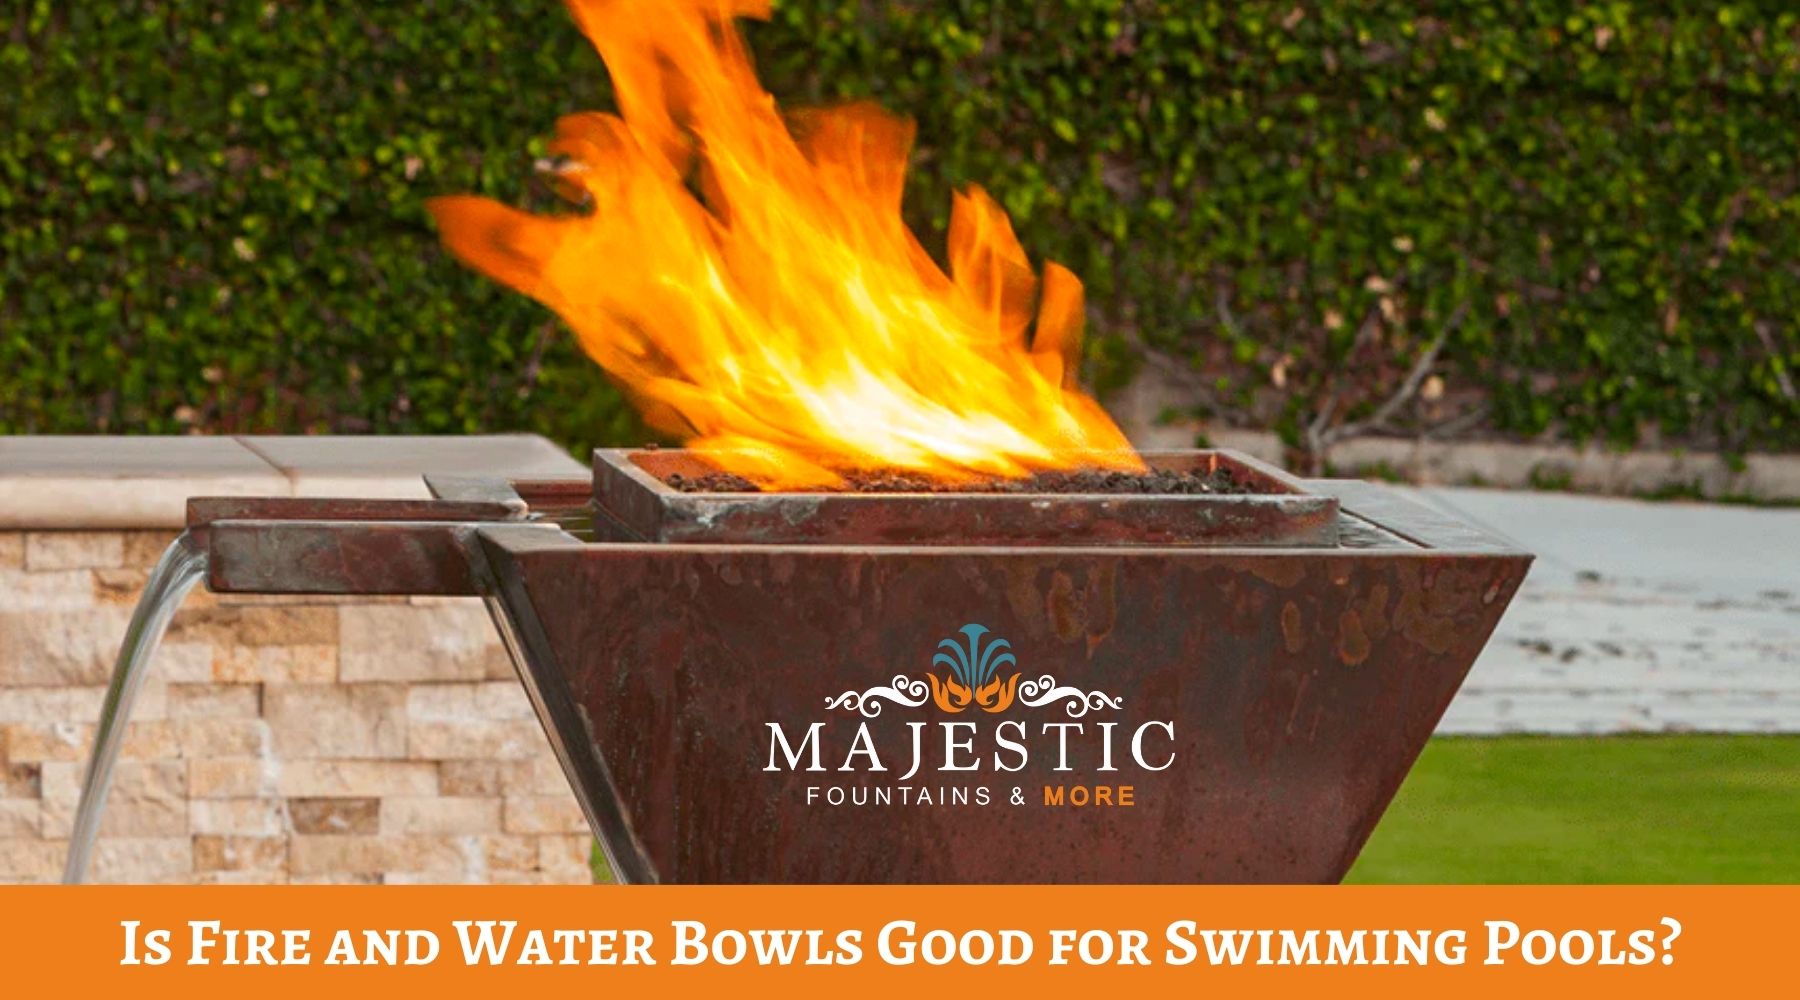 Is Fire and Water Bowls Good for Swimming Pools? - Majestic Fountains and More